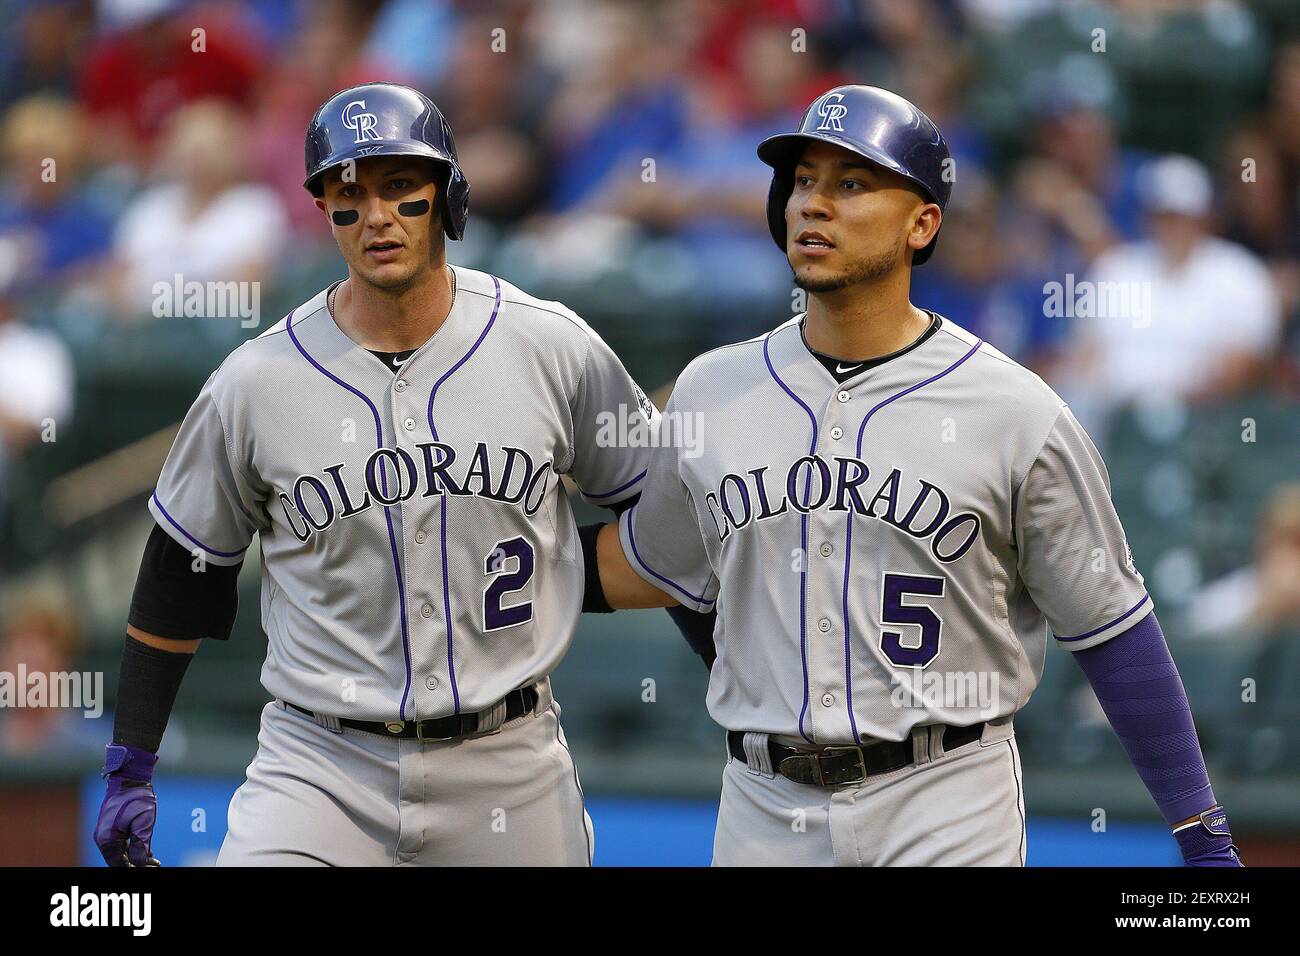 Colorado Rockies Troy Tulowitzki (2) and Carlos Gonzalez (5) celebrate  after scoring in the first inning against the Texas Rangers in Arlington,  Texas, on Wednesday May 7, 2014. (Photo by Ron Jenkins/Fort